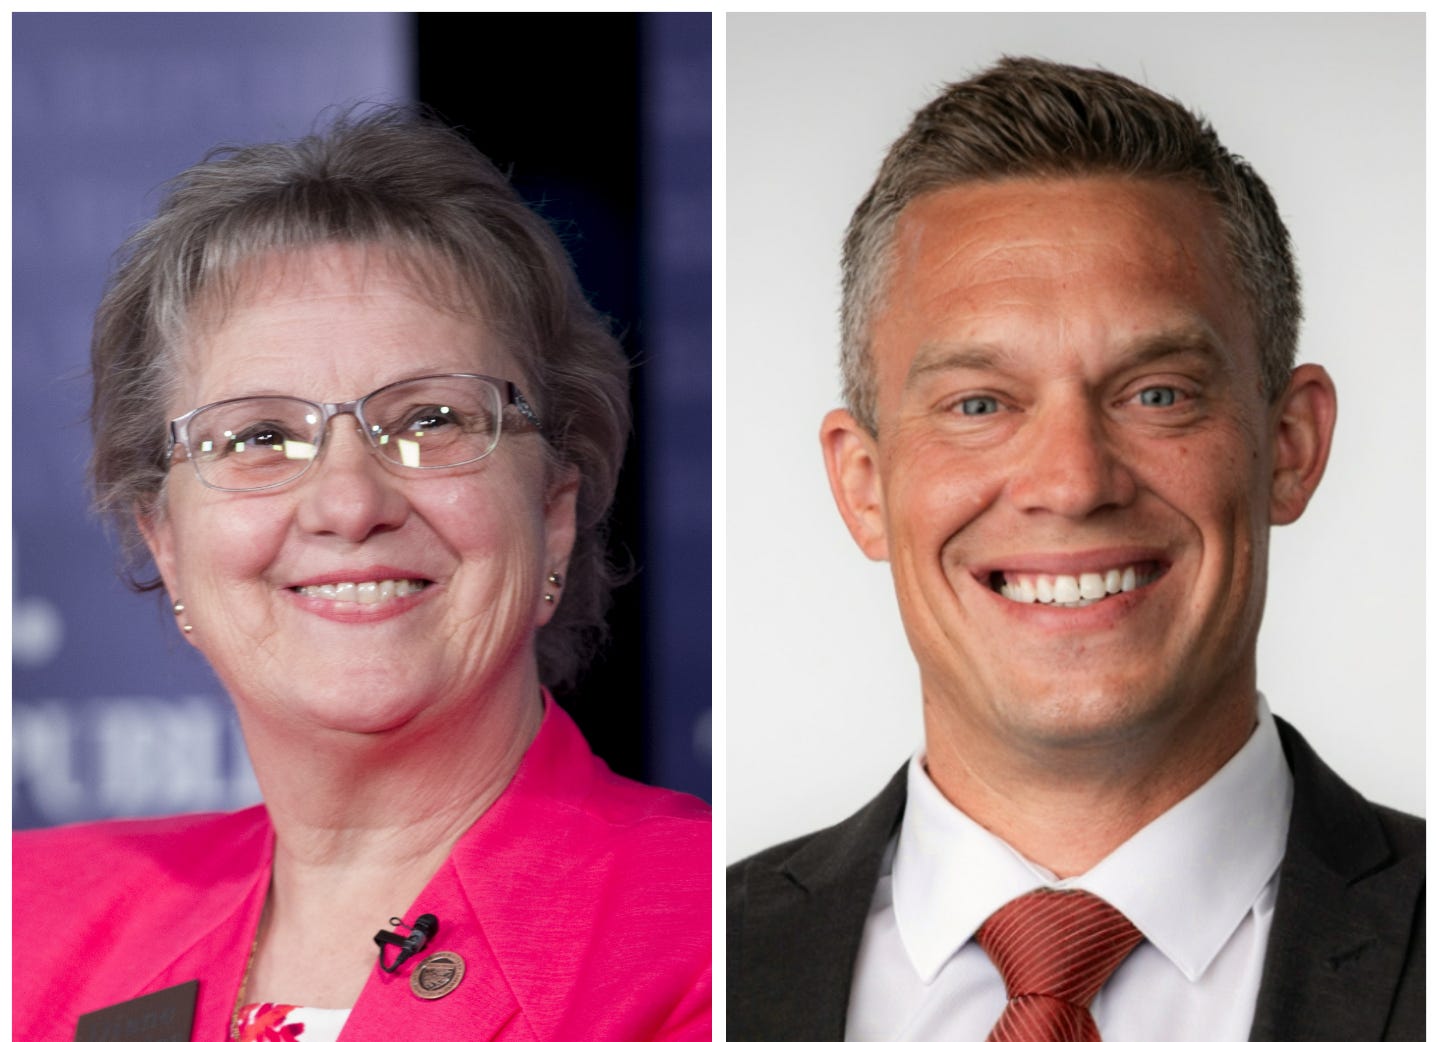 Diane Douglas and Brad Shafer are running for the Mesquite District on the Peoria City Council.